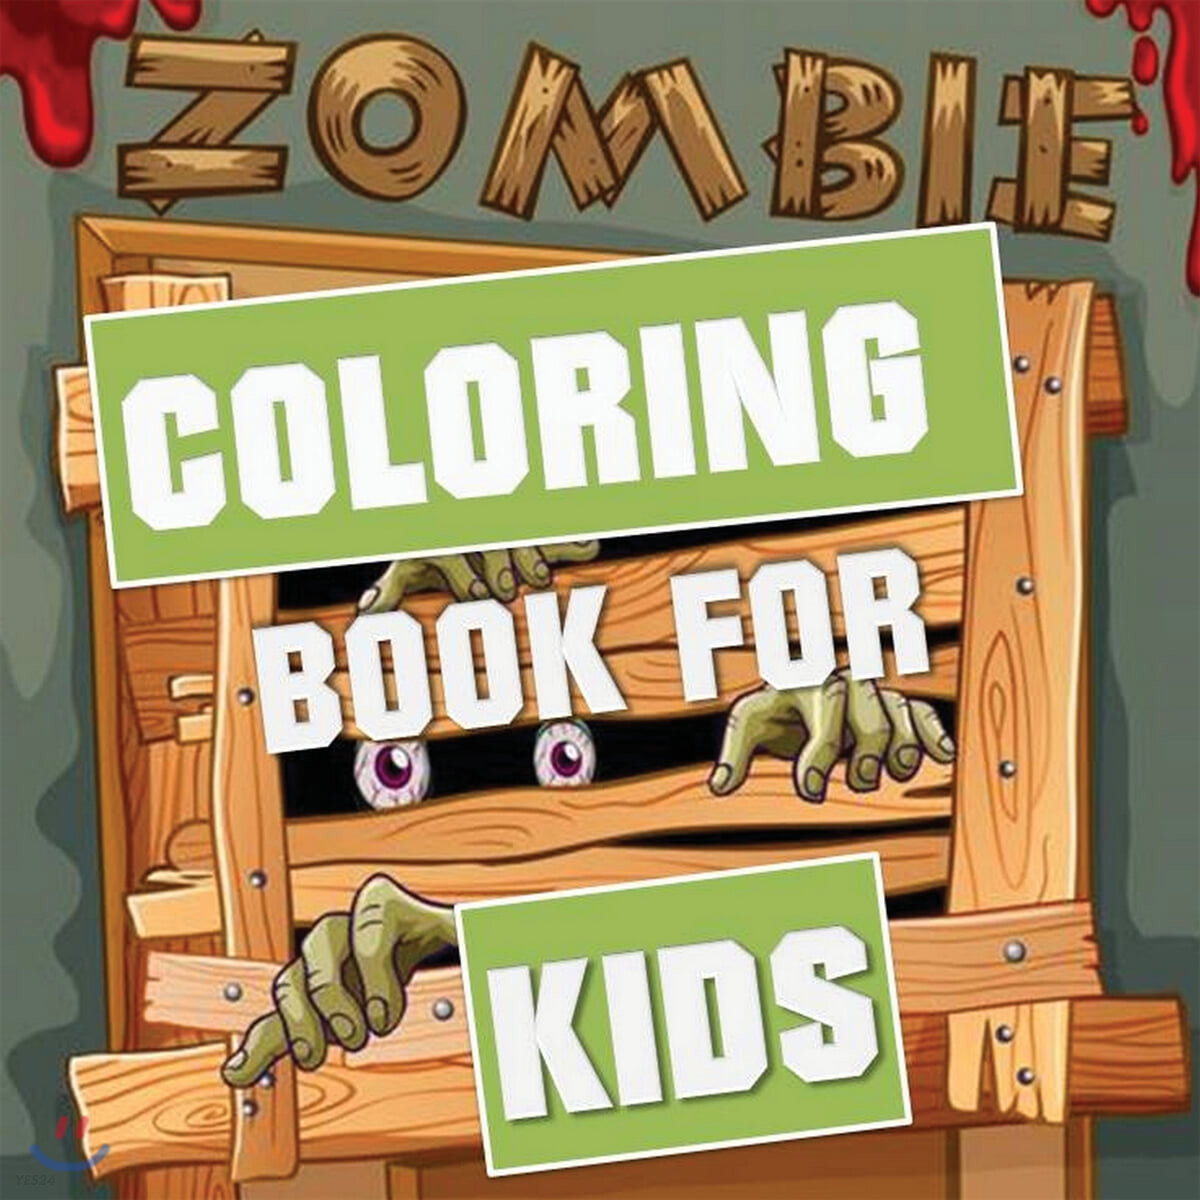 Zombie Coloring Book for Kids